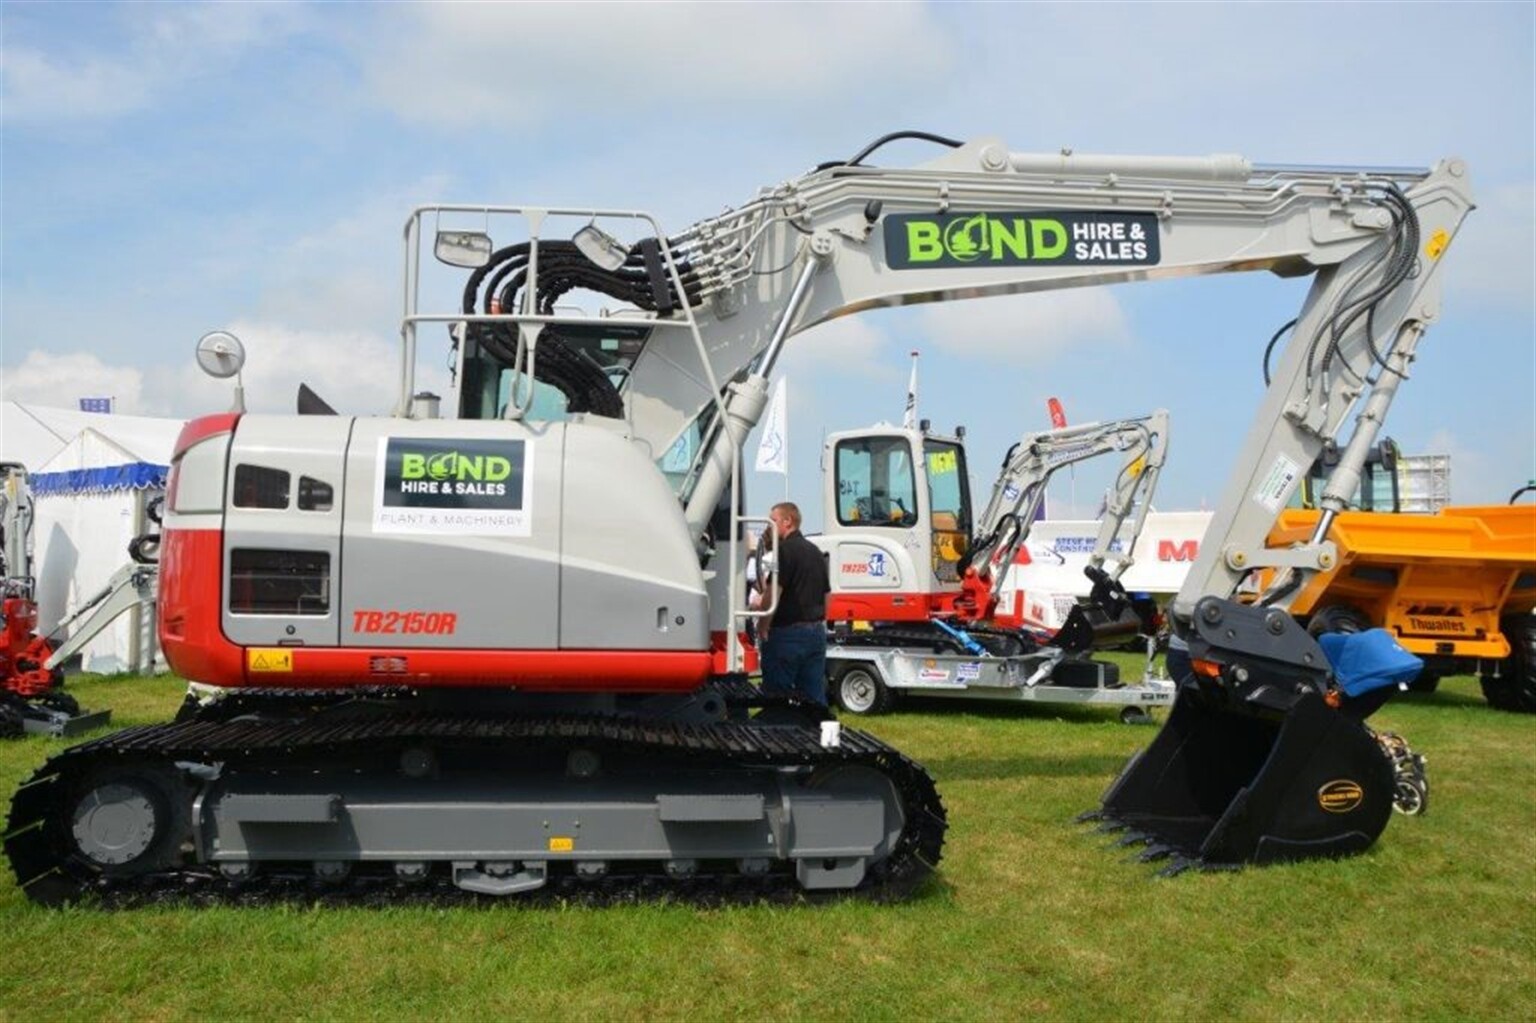 Diggers day out at the Royal Cornwall Show (Part One)